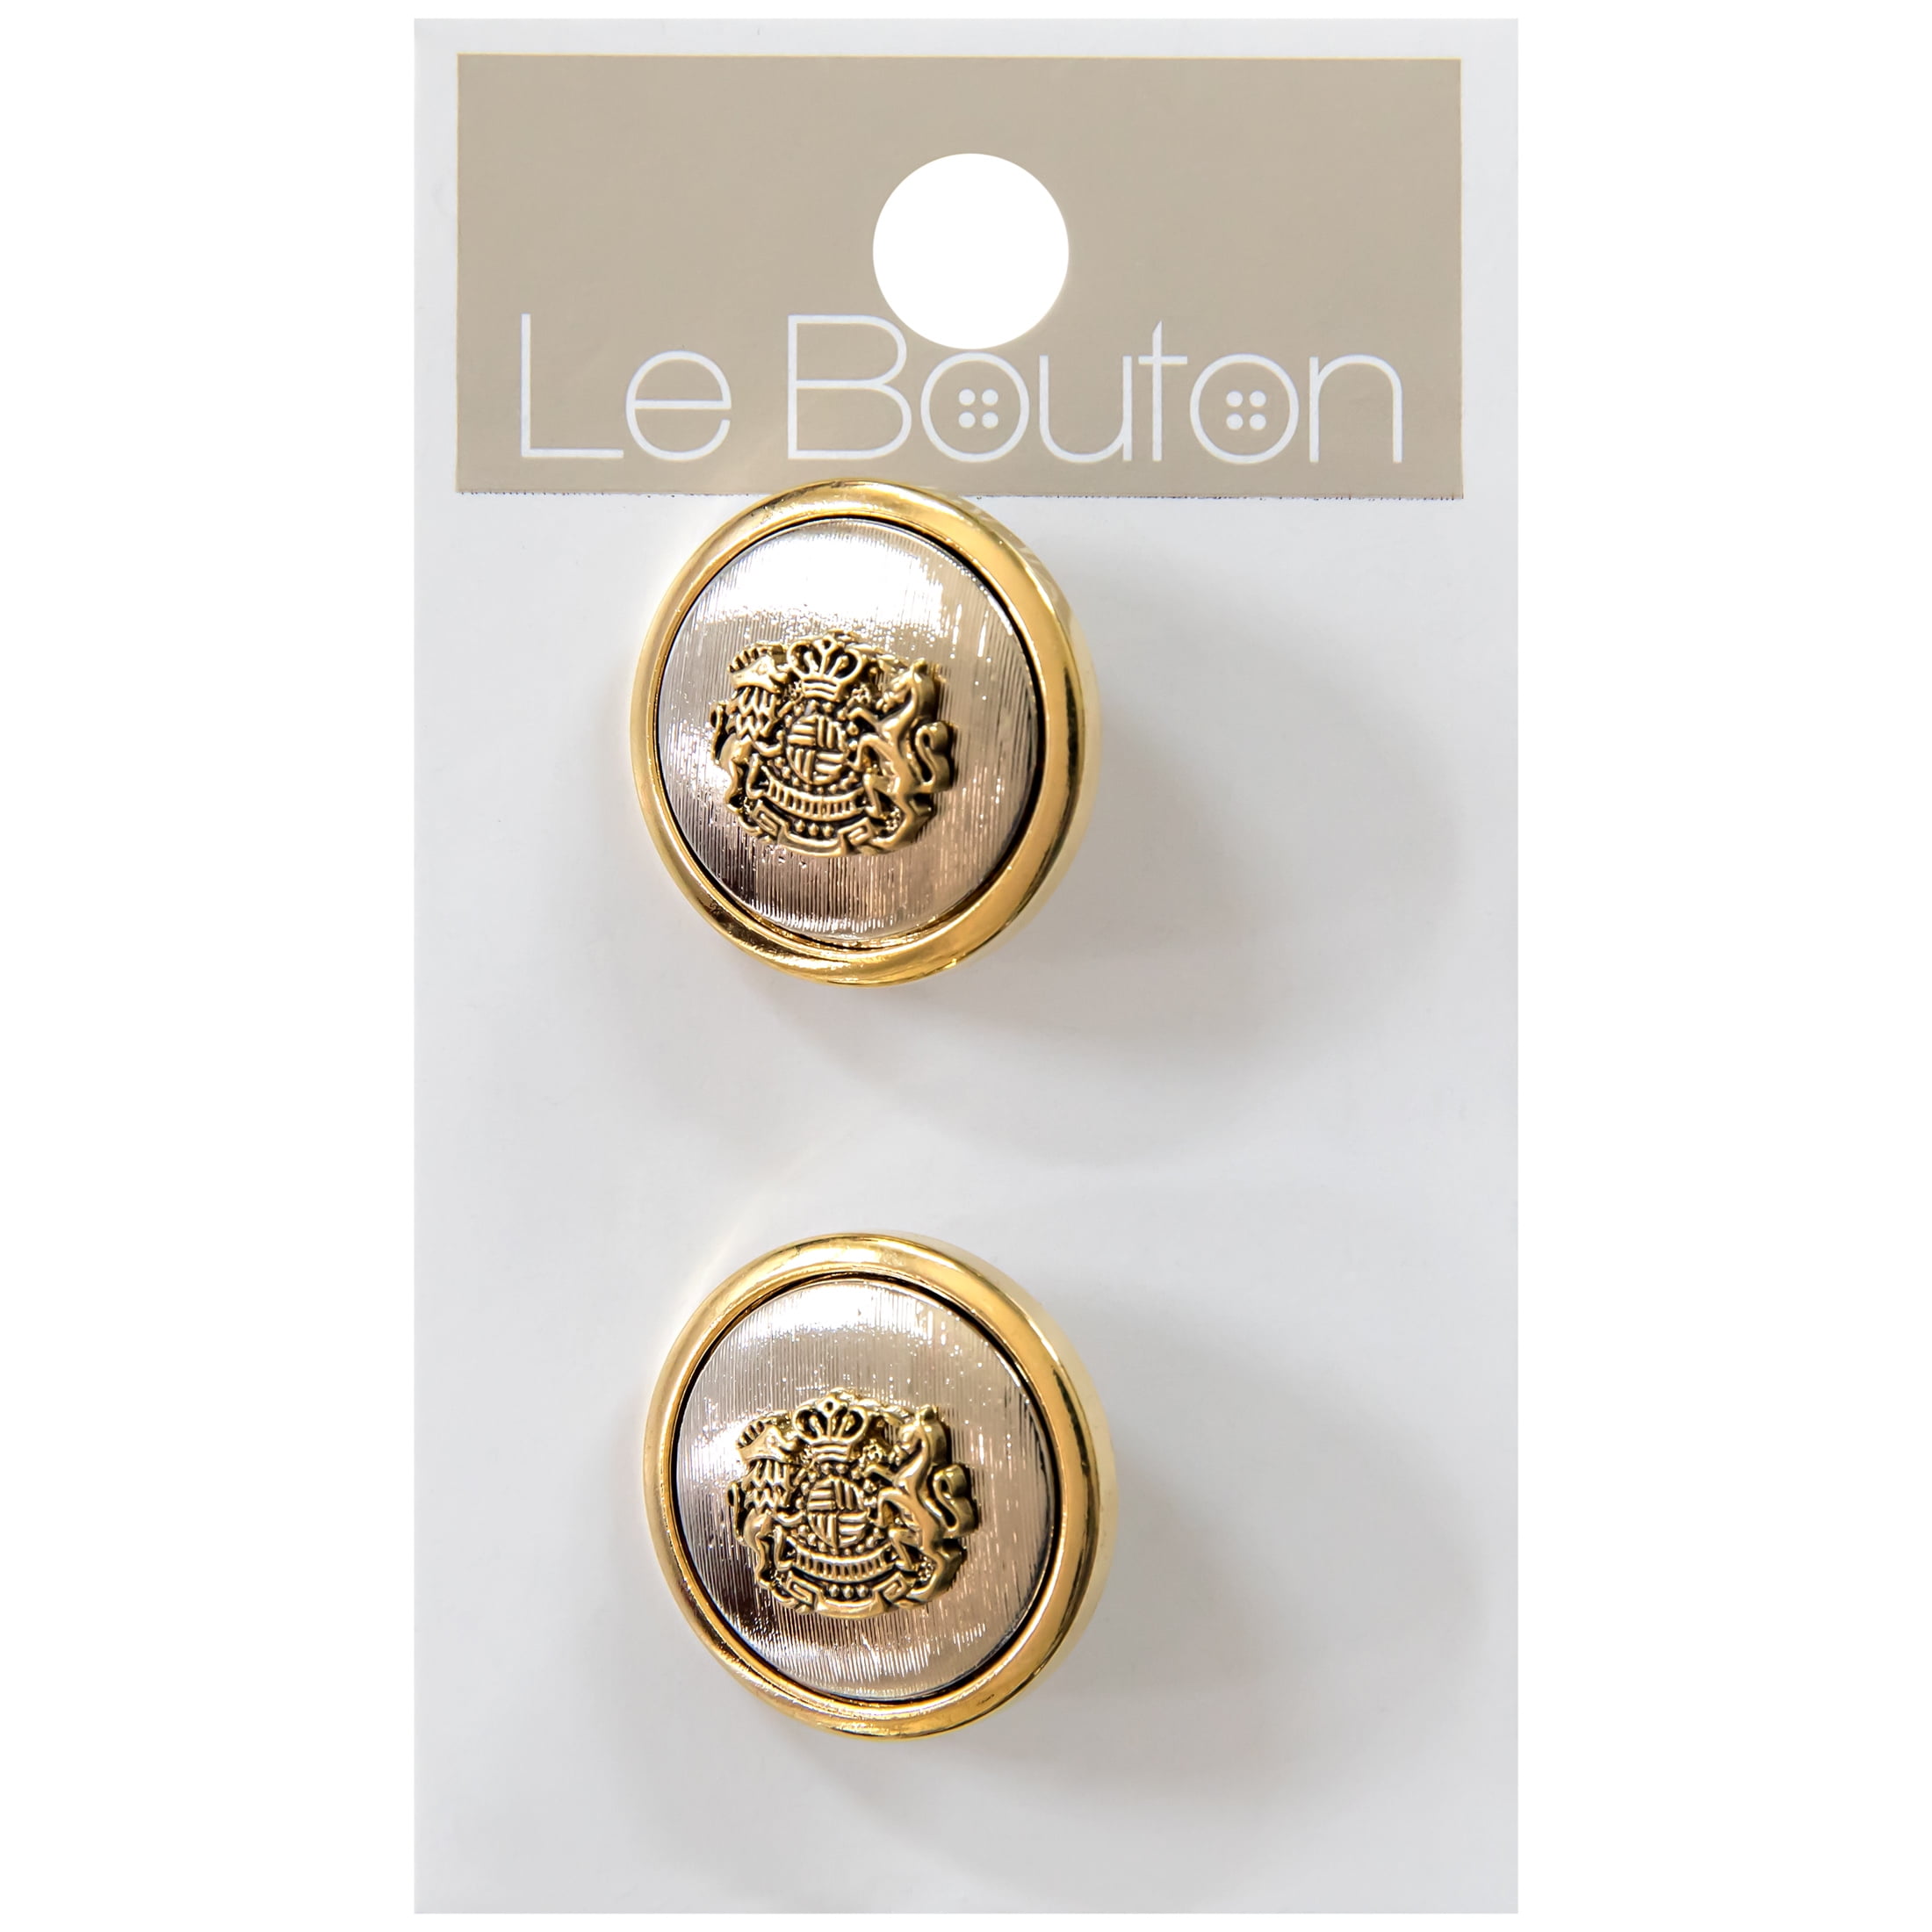 12/24 7/8" Gold Tone Metal Boutons Sewing Buttons for Craft DECO 22.0 mm 